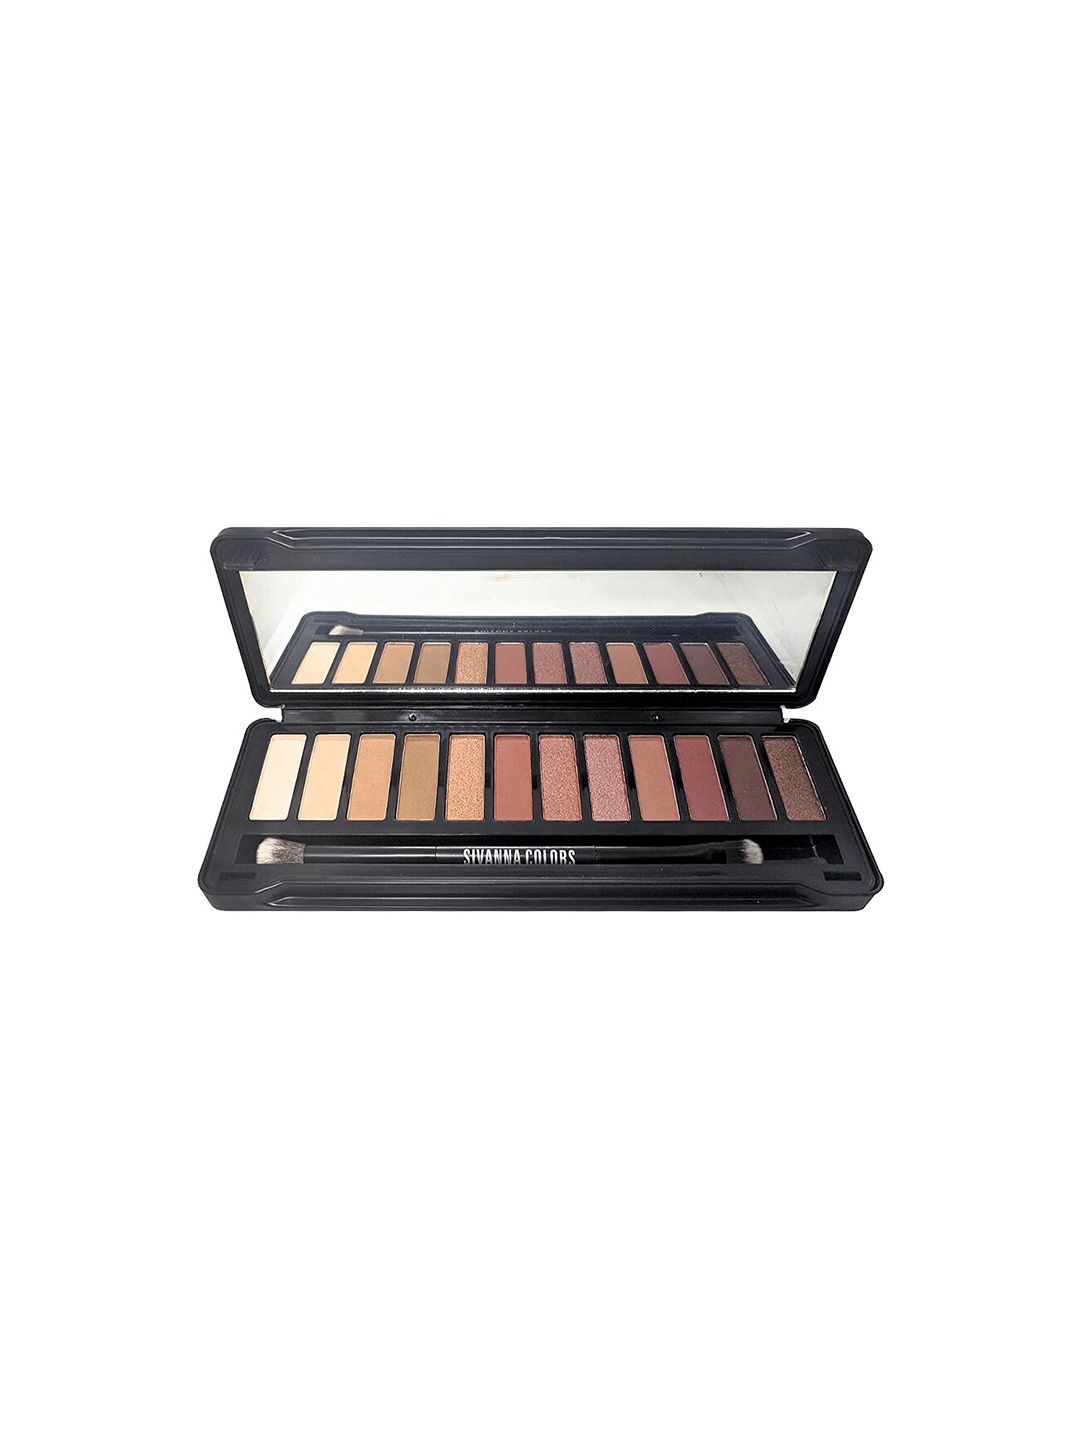 Sivanna Colors Make Up Studio Erthy Eye Shadow Palette - HF208 01 Price in India